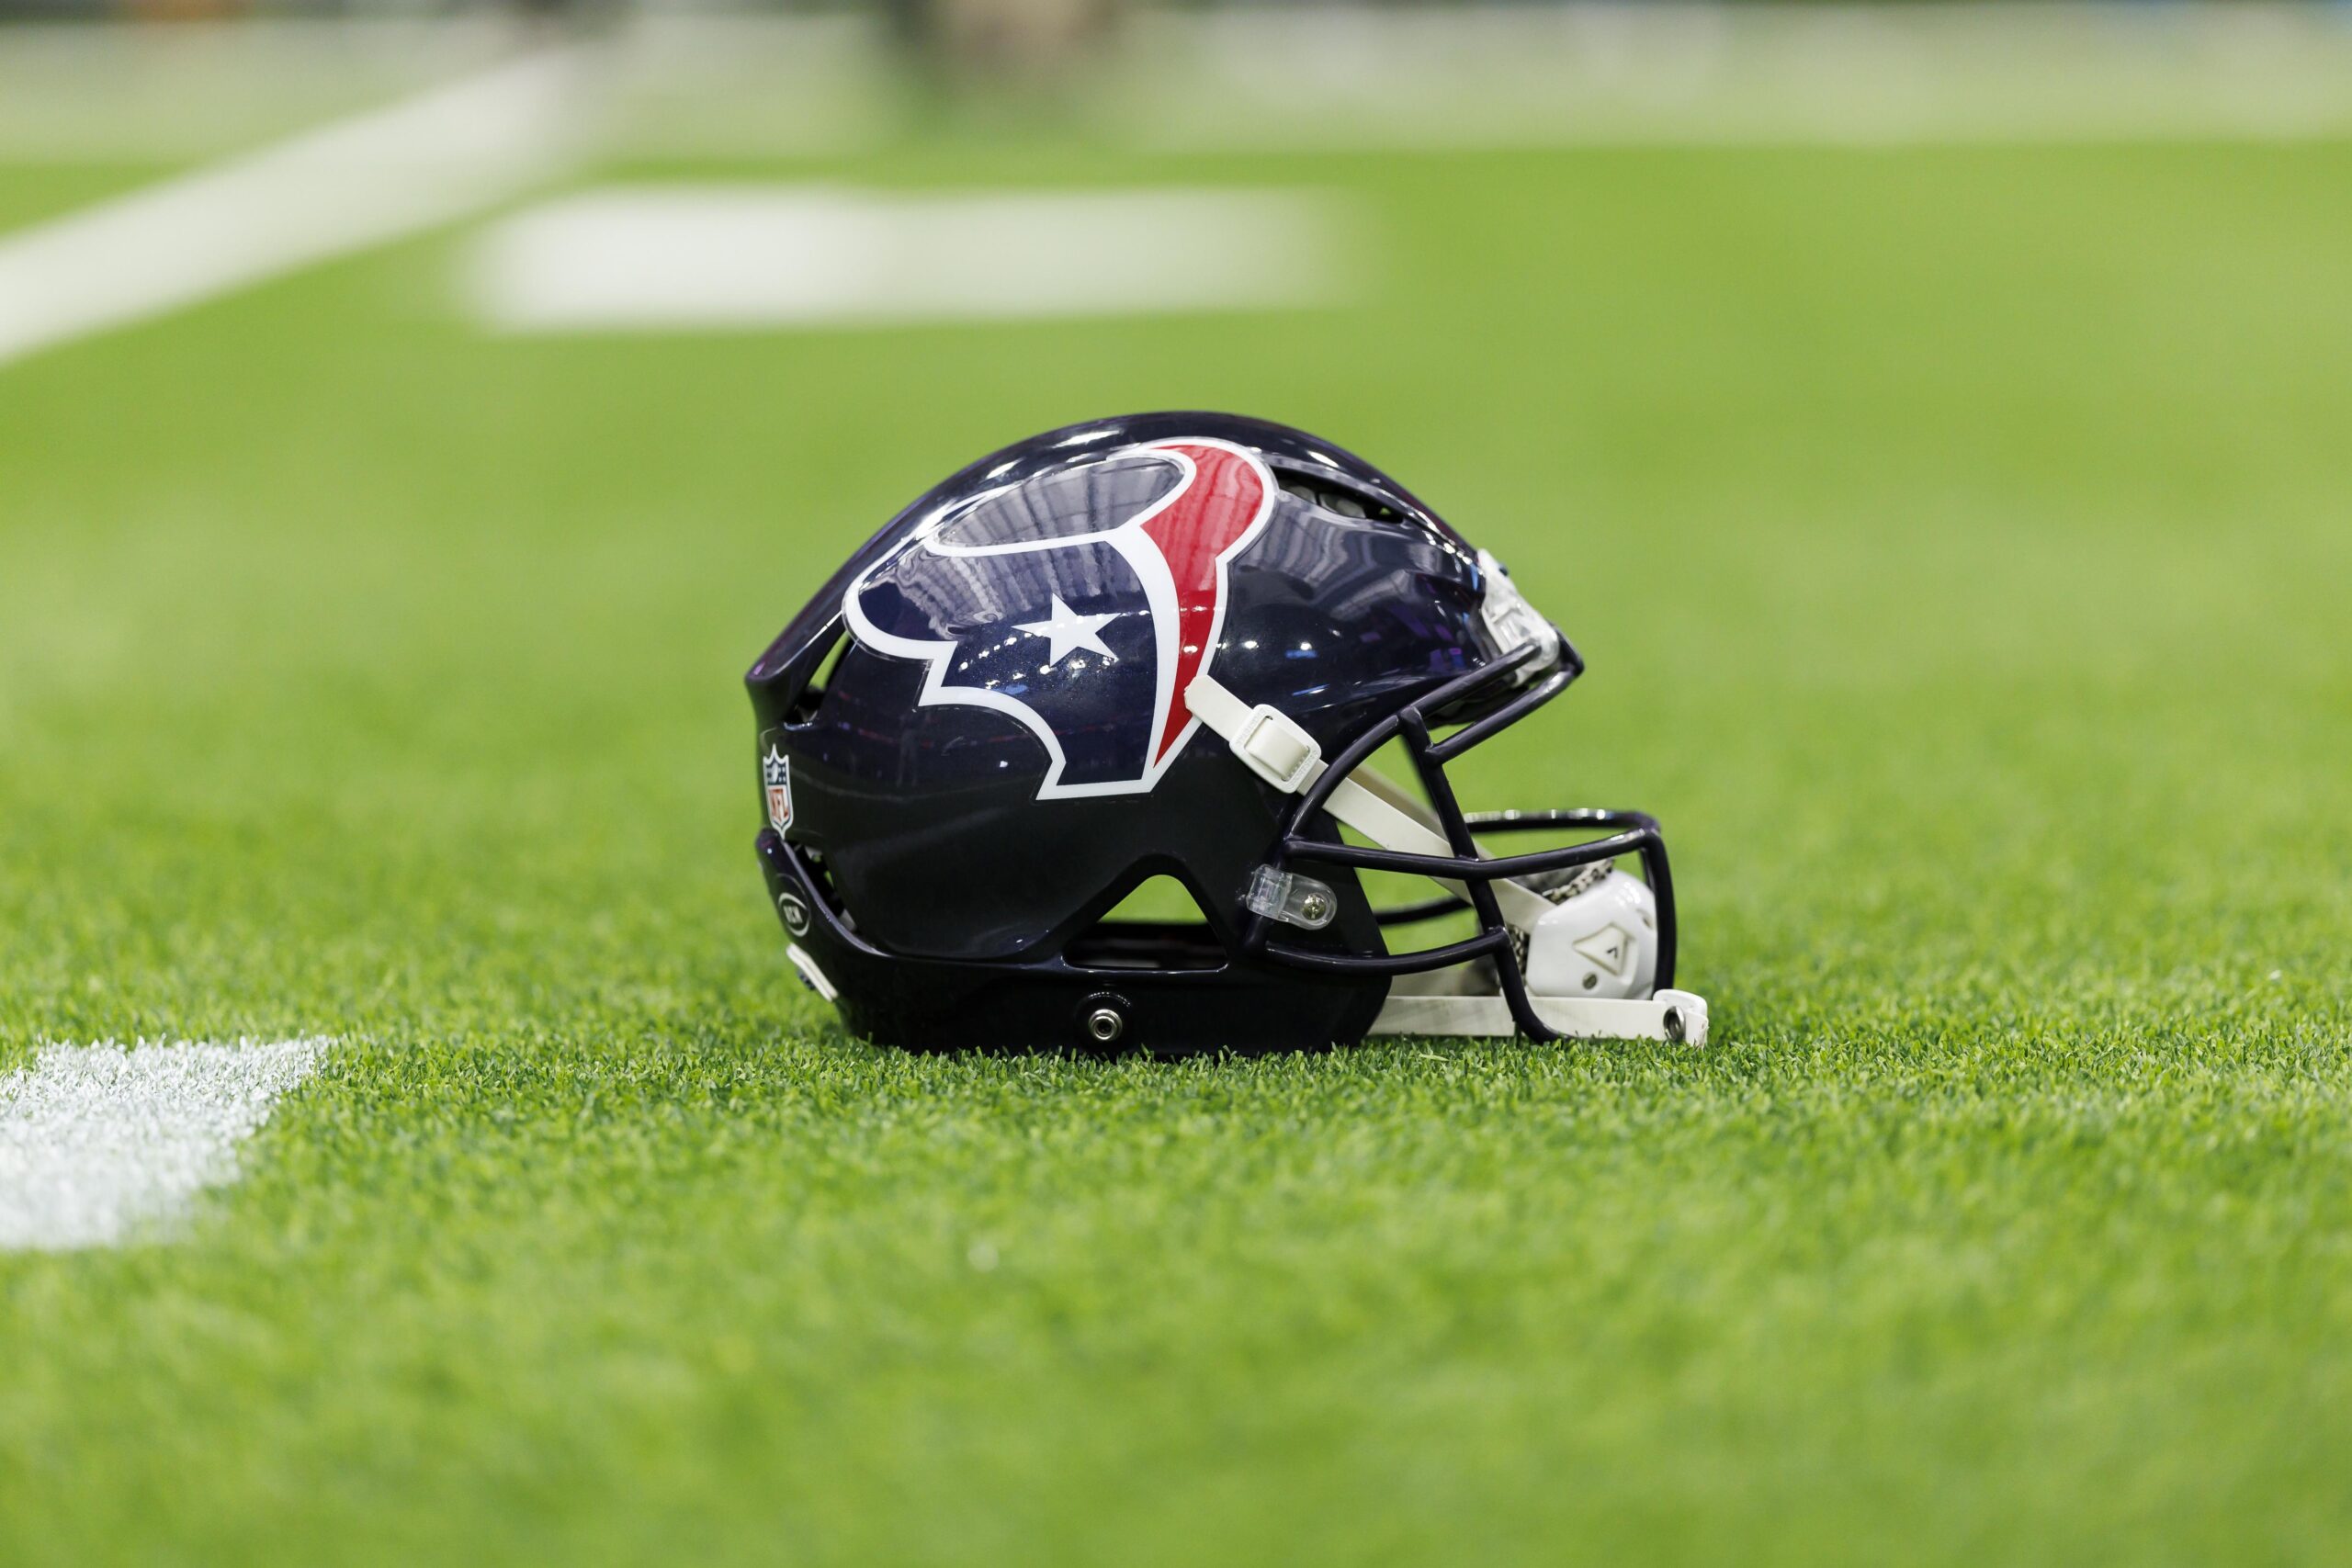 Texans News: Texans signed An Outstanding star to mammoth three-year extension worth around $24million per year